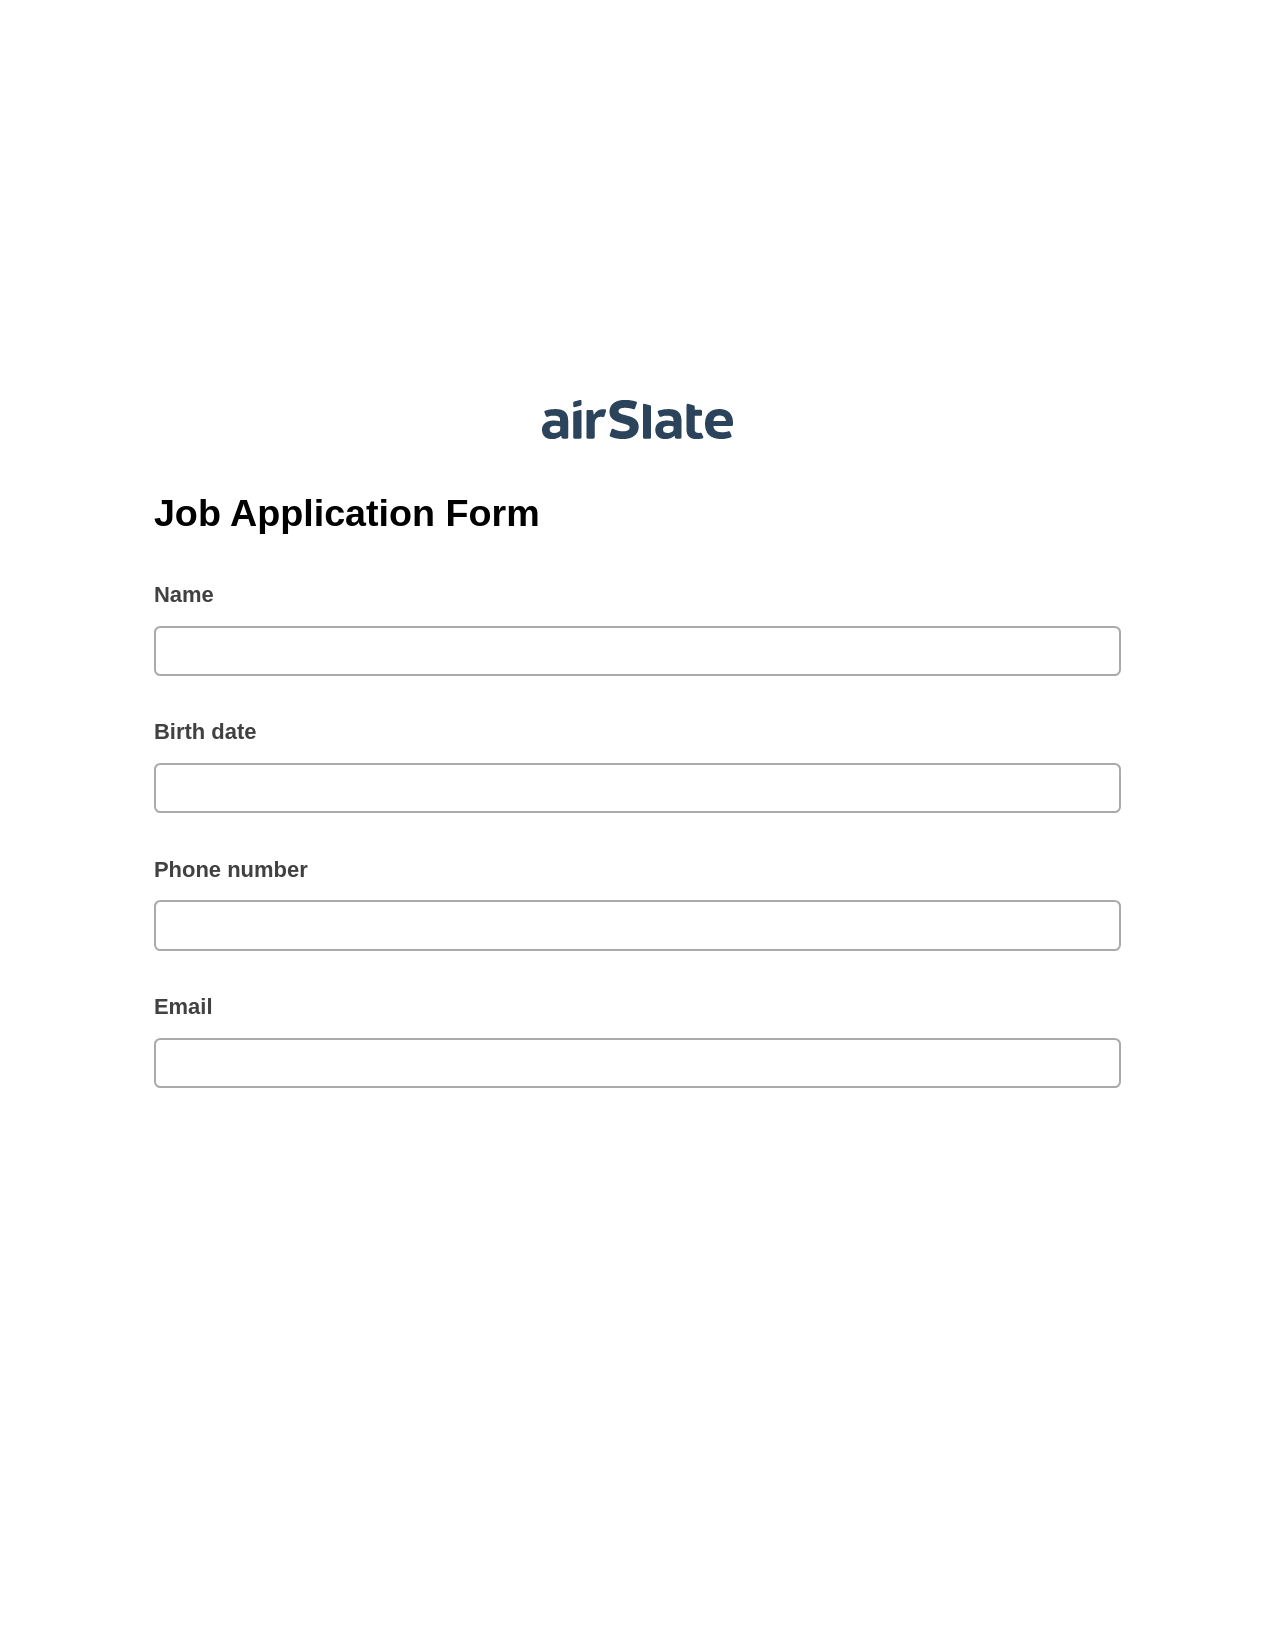 Multirole Job Application Form Pre-fill from another Slate Bot, Update Salesforce Record Bot, Archive to SharePoint Folder Bot